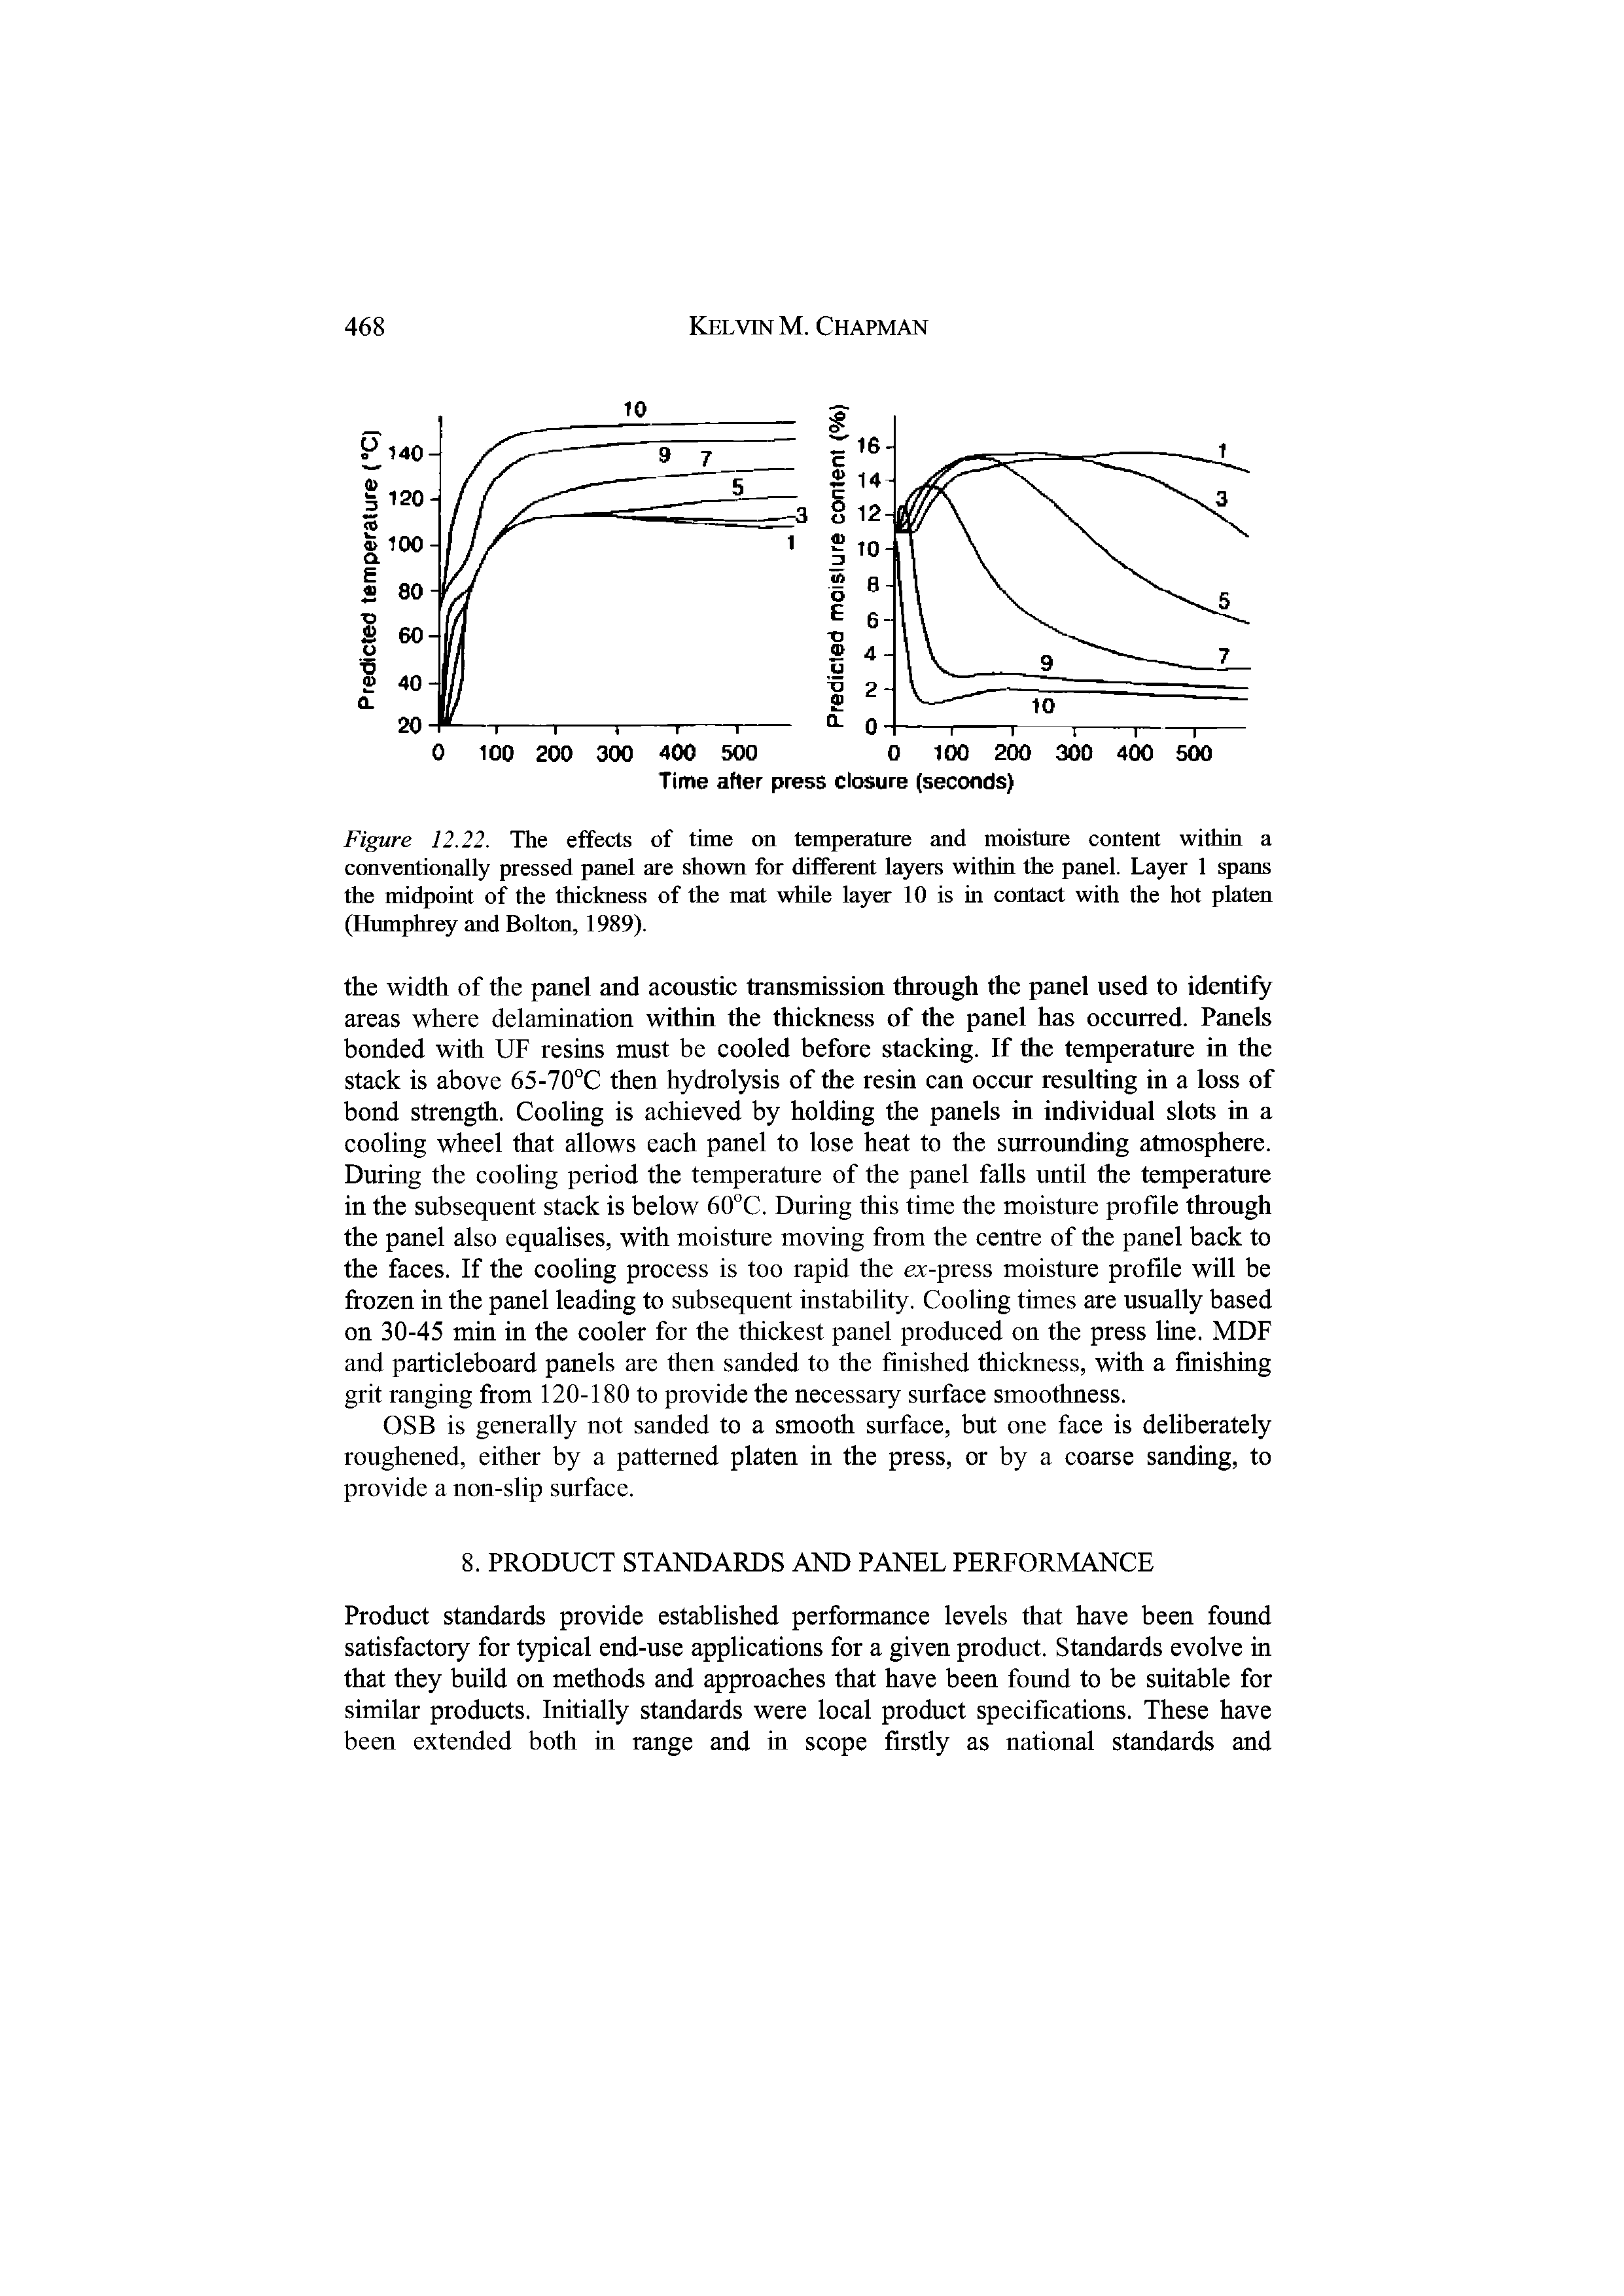 Figure 12.22. The effects of time on temperature and moisture content within a conventionally pressed panel are shown for different layers within the panel. Layer 1 spans the midpoint of the thickness of the mat while layer 10 is in contact with the hot platen (Humphrey and Bolton, 1989).